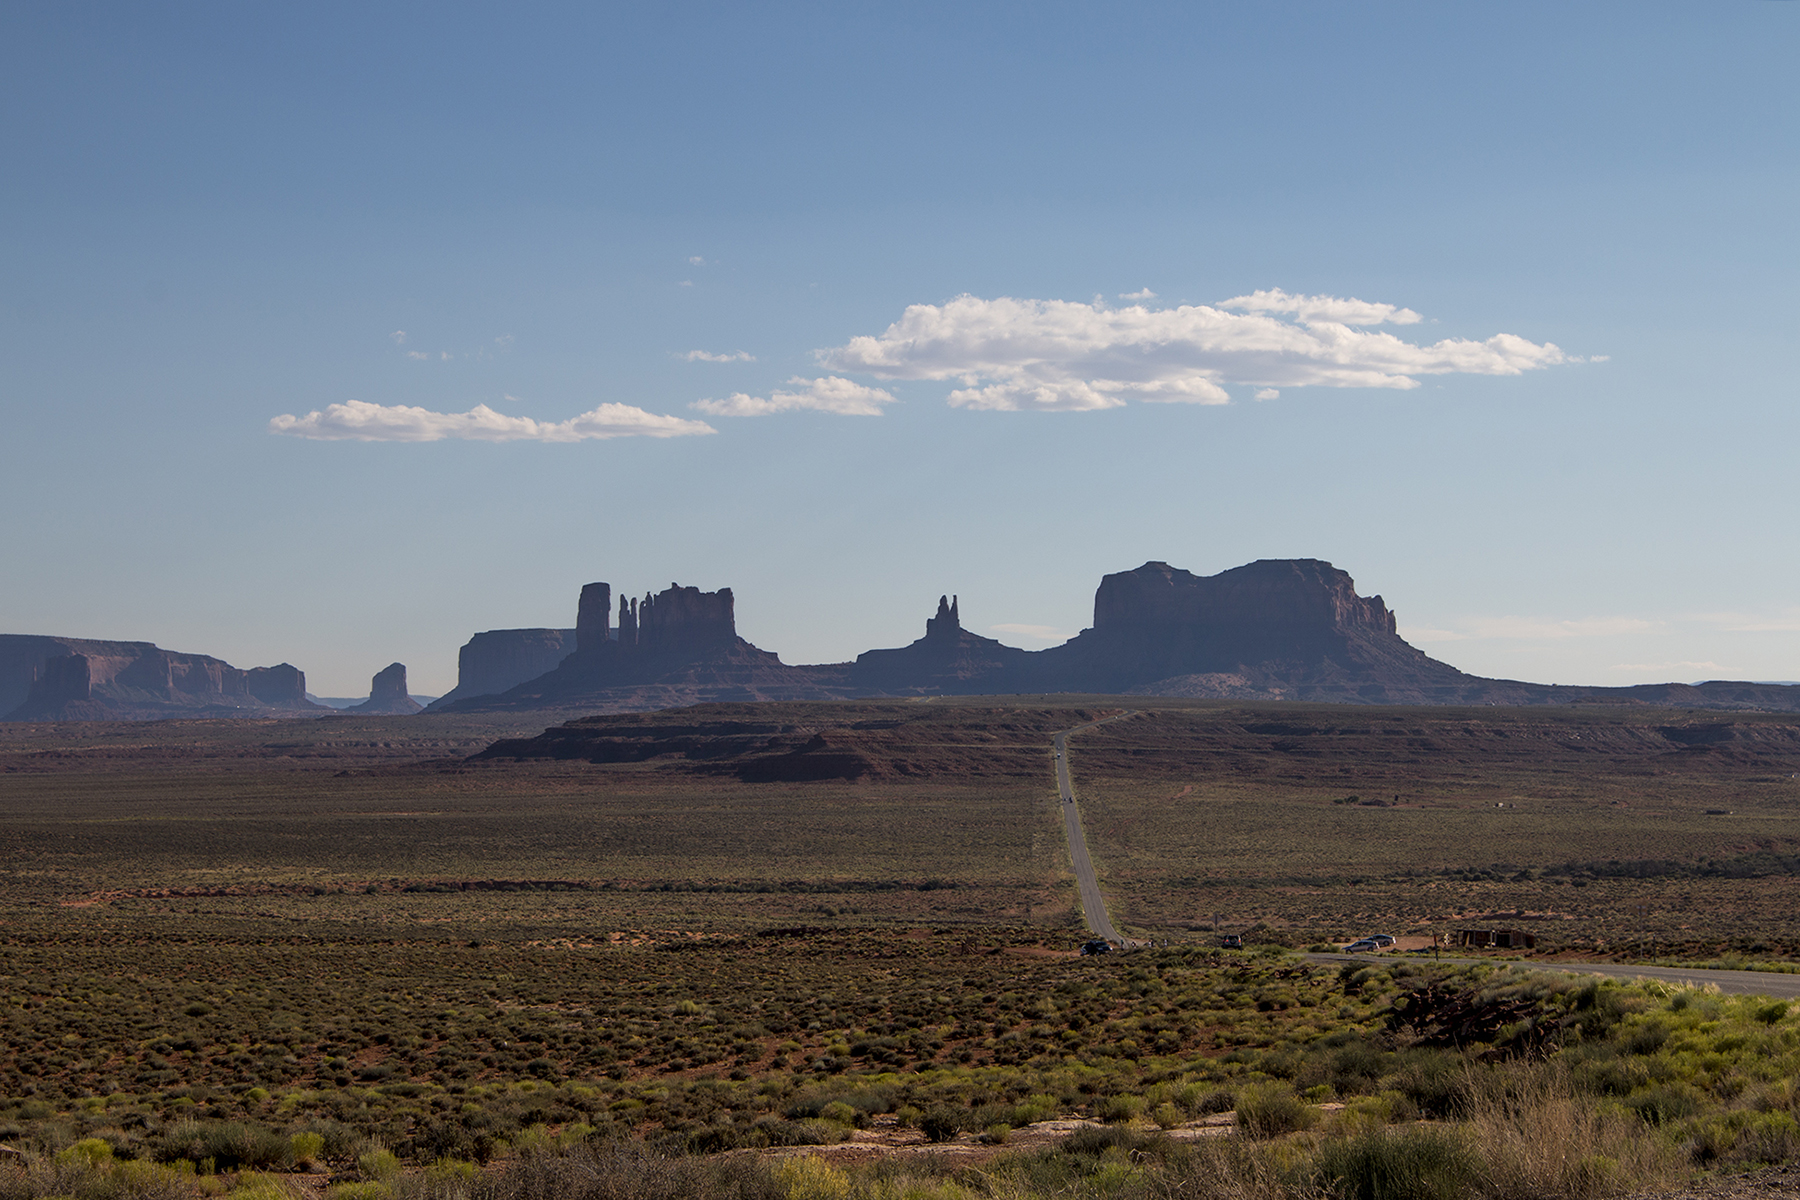 Nearly 200 miles separate Navajo Mountain from Monticello in San Juan County, Utah. The trip requires drivers to first travel south into Arizona before traveling north to the county seat. In between the two destinations rests Monument Valley Navajo Tribal Park. (Erin Vogel-Fox/News21)